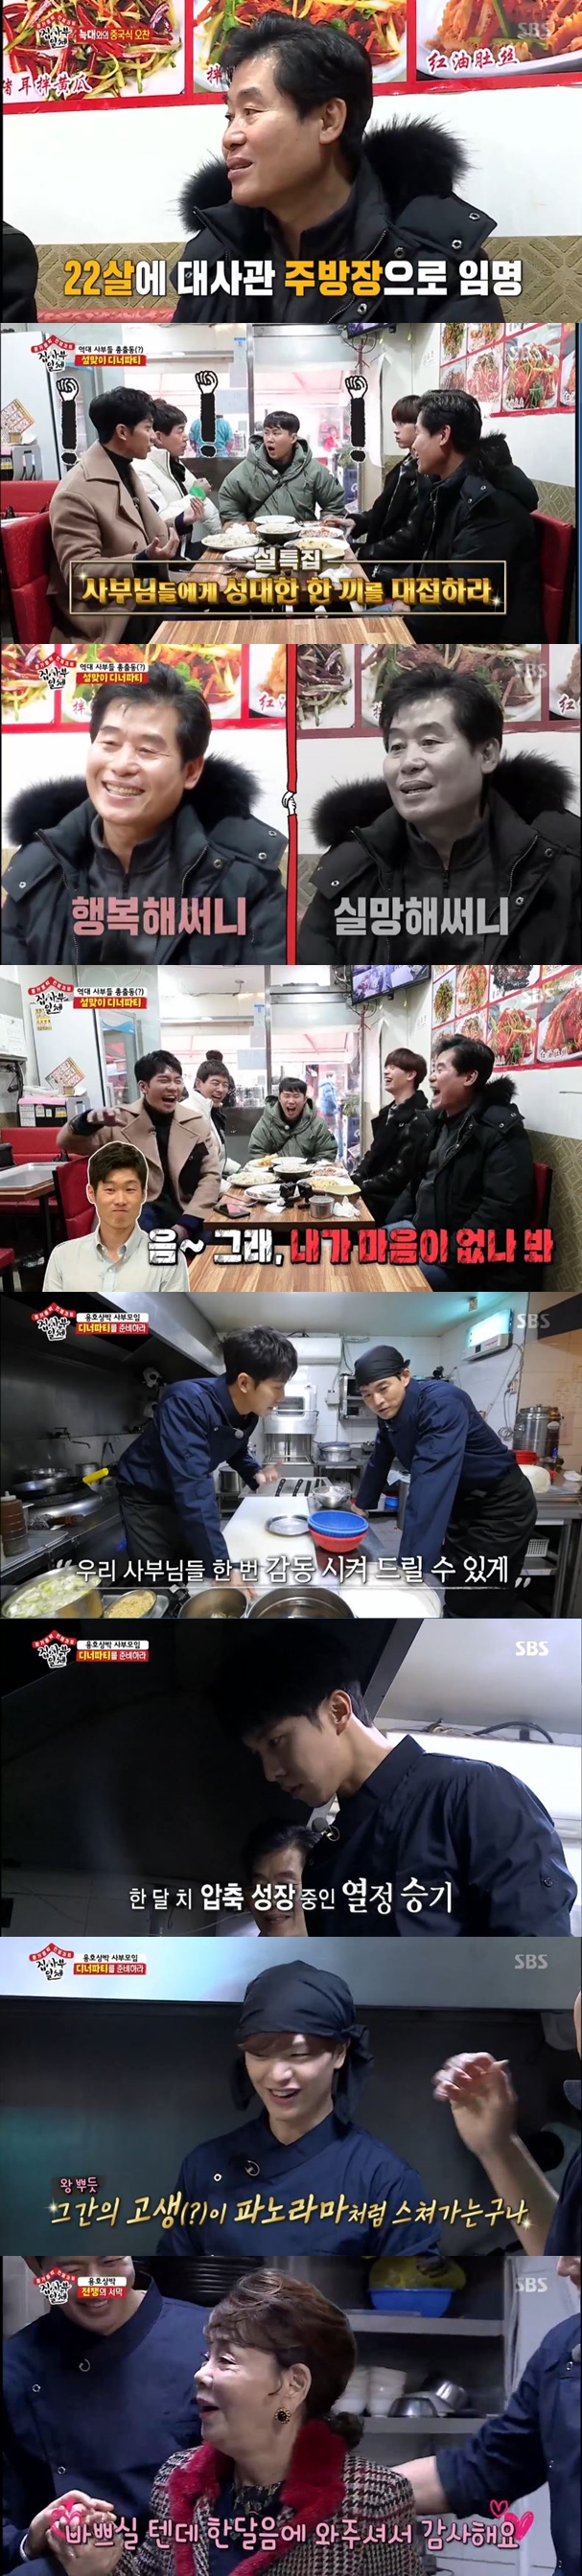 The masters of all time have come together.In the SBS entertainment program All The Butlers broadcasted on the afternoon of the 27th, Lee Yeon-bok Le Chef came out as a new master and spent a night with the members.Kim Hee-chul, who came out as a hint fairy, was embarrassed by the identity in a second.When the butterfly sleep flowed out of the phone connection, Yang Se-hyeong said, It seems to be a phone call I know. As soon as the phone was connected, he shouted, Hello, Hee Chul Lee.Kim Hee-chul said, I had a lot of things I prepared, but it was too much.Lee Seung-gi said, I will call you again, do what you want to do.Kim Hee-chul, who made a phone call again, was satisfied with Lee Soon-jae and Kim Byung-oks vocal imitation.Kim Hee-chul, who was twisted from the beginning, made a mistake when he gave a hint.Kim Hee-chul said he was a well-dressed person as a hint of the master, and the members noticed about the masters identity.Yang Se-hyeong asked, Did not you stay with me at the last drink? Kim Hee-chul again hung up, embarrassed by it was too much.As the members expected, the identity of the new master was Lee Yeon-bok Le Chef.When Lee Yeon-bok saw the cooking at the market store and asked the members, Why do you see it in the market? He said, I came to buy food for the snow.Lee Yeon-bok introduced the Chinese food while traveling around the market with the members.Lee Yeon-bok gave the members a market experience by telling them about the common sense of bread that does not contain anything in the identity of the dumplings that Koreans are confused about.Lee Yeon-bok confessions the story of herself becoming the lonely wolf of Myeong-dong.Lee Seung-gi followed Lee Yeon-bok and asked, Why is the Masters nickname the lonely wolf of Myeong-dong?Lee Yeon-bok replied, I got such a nickname because I had been working on people who were fighting to protect my seniors before. The members who heard this gave me a smile because they could not hide their frightened expression.Lee Yeon-bok, who had been a Confessions member of his past, took the members to a restaurant and served a Chinese luncheon.Lee Seung-gi asked about his past as he ate food, and Lee Yeon-bok said, I was scouted in a Chinese restaurant during my lonely wolf days; that was 22 years old.Lee Yeon-bok told the members of what he had experienced after becoming Le Chef and said, I did not have a master at that time.So I was envious of seeing this program, he said.Lee Yeon-bok told the members, In that sense, this time, we will invite the masters to serve them. The members were embarrassed by the sound of inviting the master.Lee Sang-yoon was worried, saying, I cant imagine them coming together in one place.The first master invited Lee Sun-hee, who expressed his fanciful feelings to the members who hesitated to call, saying, The person I want to see the most among the previous masters is Lee Sun-hee.Lee Seung-gi called Lee Sun-hee himself to invite him to a meal.However, Lee Sun-hee refused to invite him, saying, There is a performance practice. Lee Yeon-bok laughed as if he said, I will not cook hard today.He then called Park Ji-sung, but failed to invite him over a schedule issue, but succeeded in inviting Jeon In-kwon and Kim Soo-mi, who attempted to do so.The members went to Lee Yeon-boks store and prepared a meal for the masters in earnest. Before the cooking, the members were worried about imagining the uncomfortable situation.When Yook Sungjae said, I will not do that, but I am worried that there will be a collision, the members took measures to prepare for the situation.The members decided on their own food through a preliminary test prepared by Lee Yeon-bok, who assigned menus to the members and went around and tutored them one-on-one.Cooking hole Lee Sang-yoon was also guided by Lee Yoon-bok to complete a great oyster champon.Yook Sungjae, who was afraid of Chinese esophagus, also made Menbosha, who can use the knife at least, under the guidance of Lee Yeon-bok.When the members were passionate about making dishes, Kim Soo-mi visited the restaurant and started a meal for the masters.